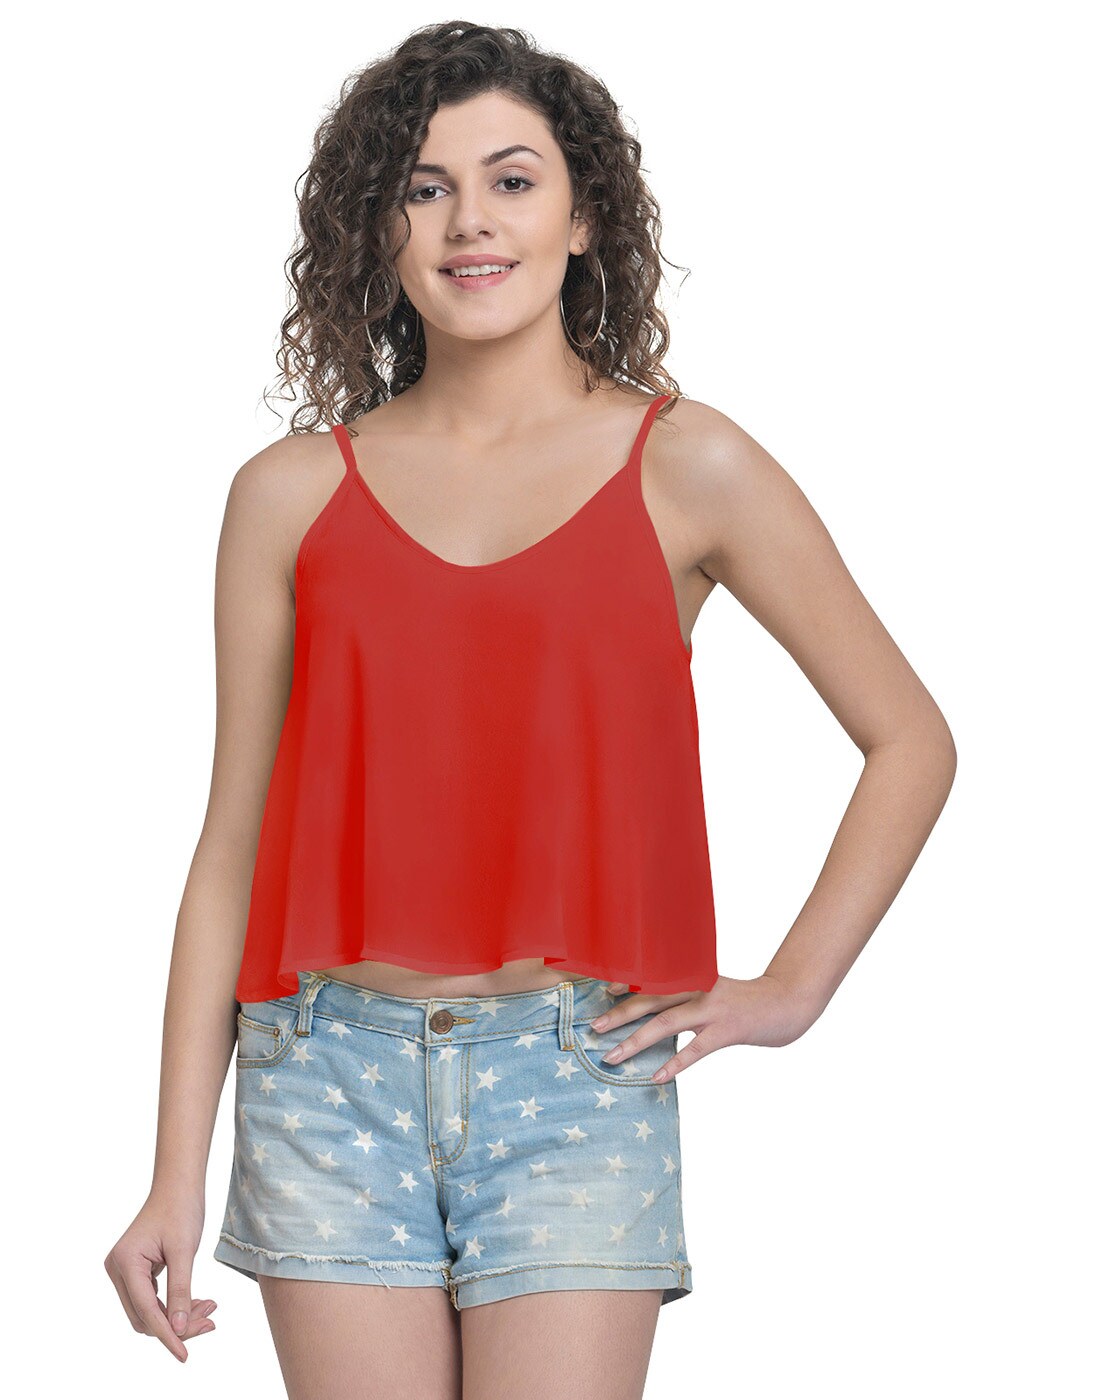 Buy Red Tops for Women by MARTINI Online